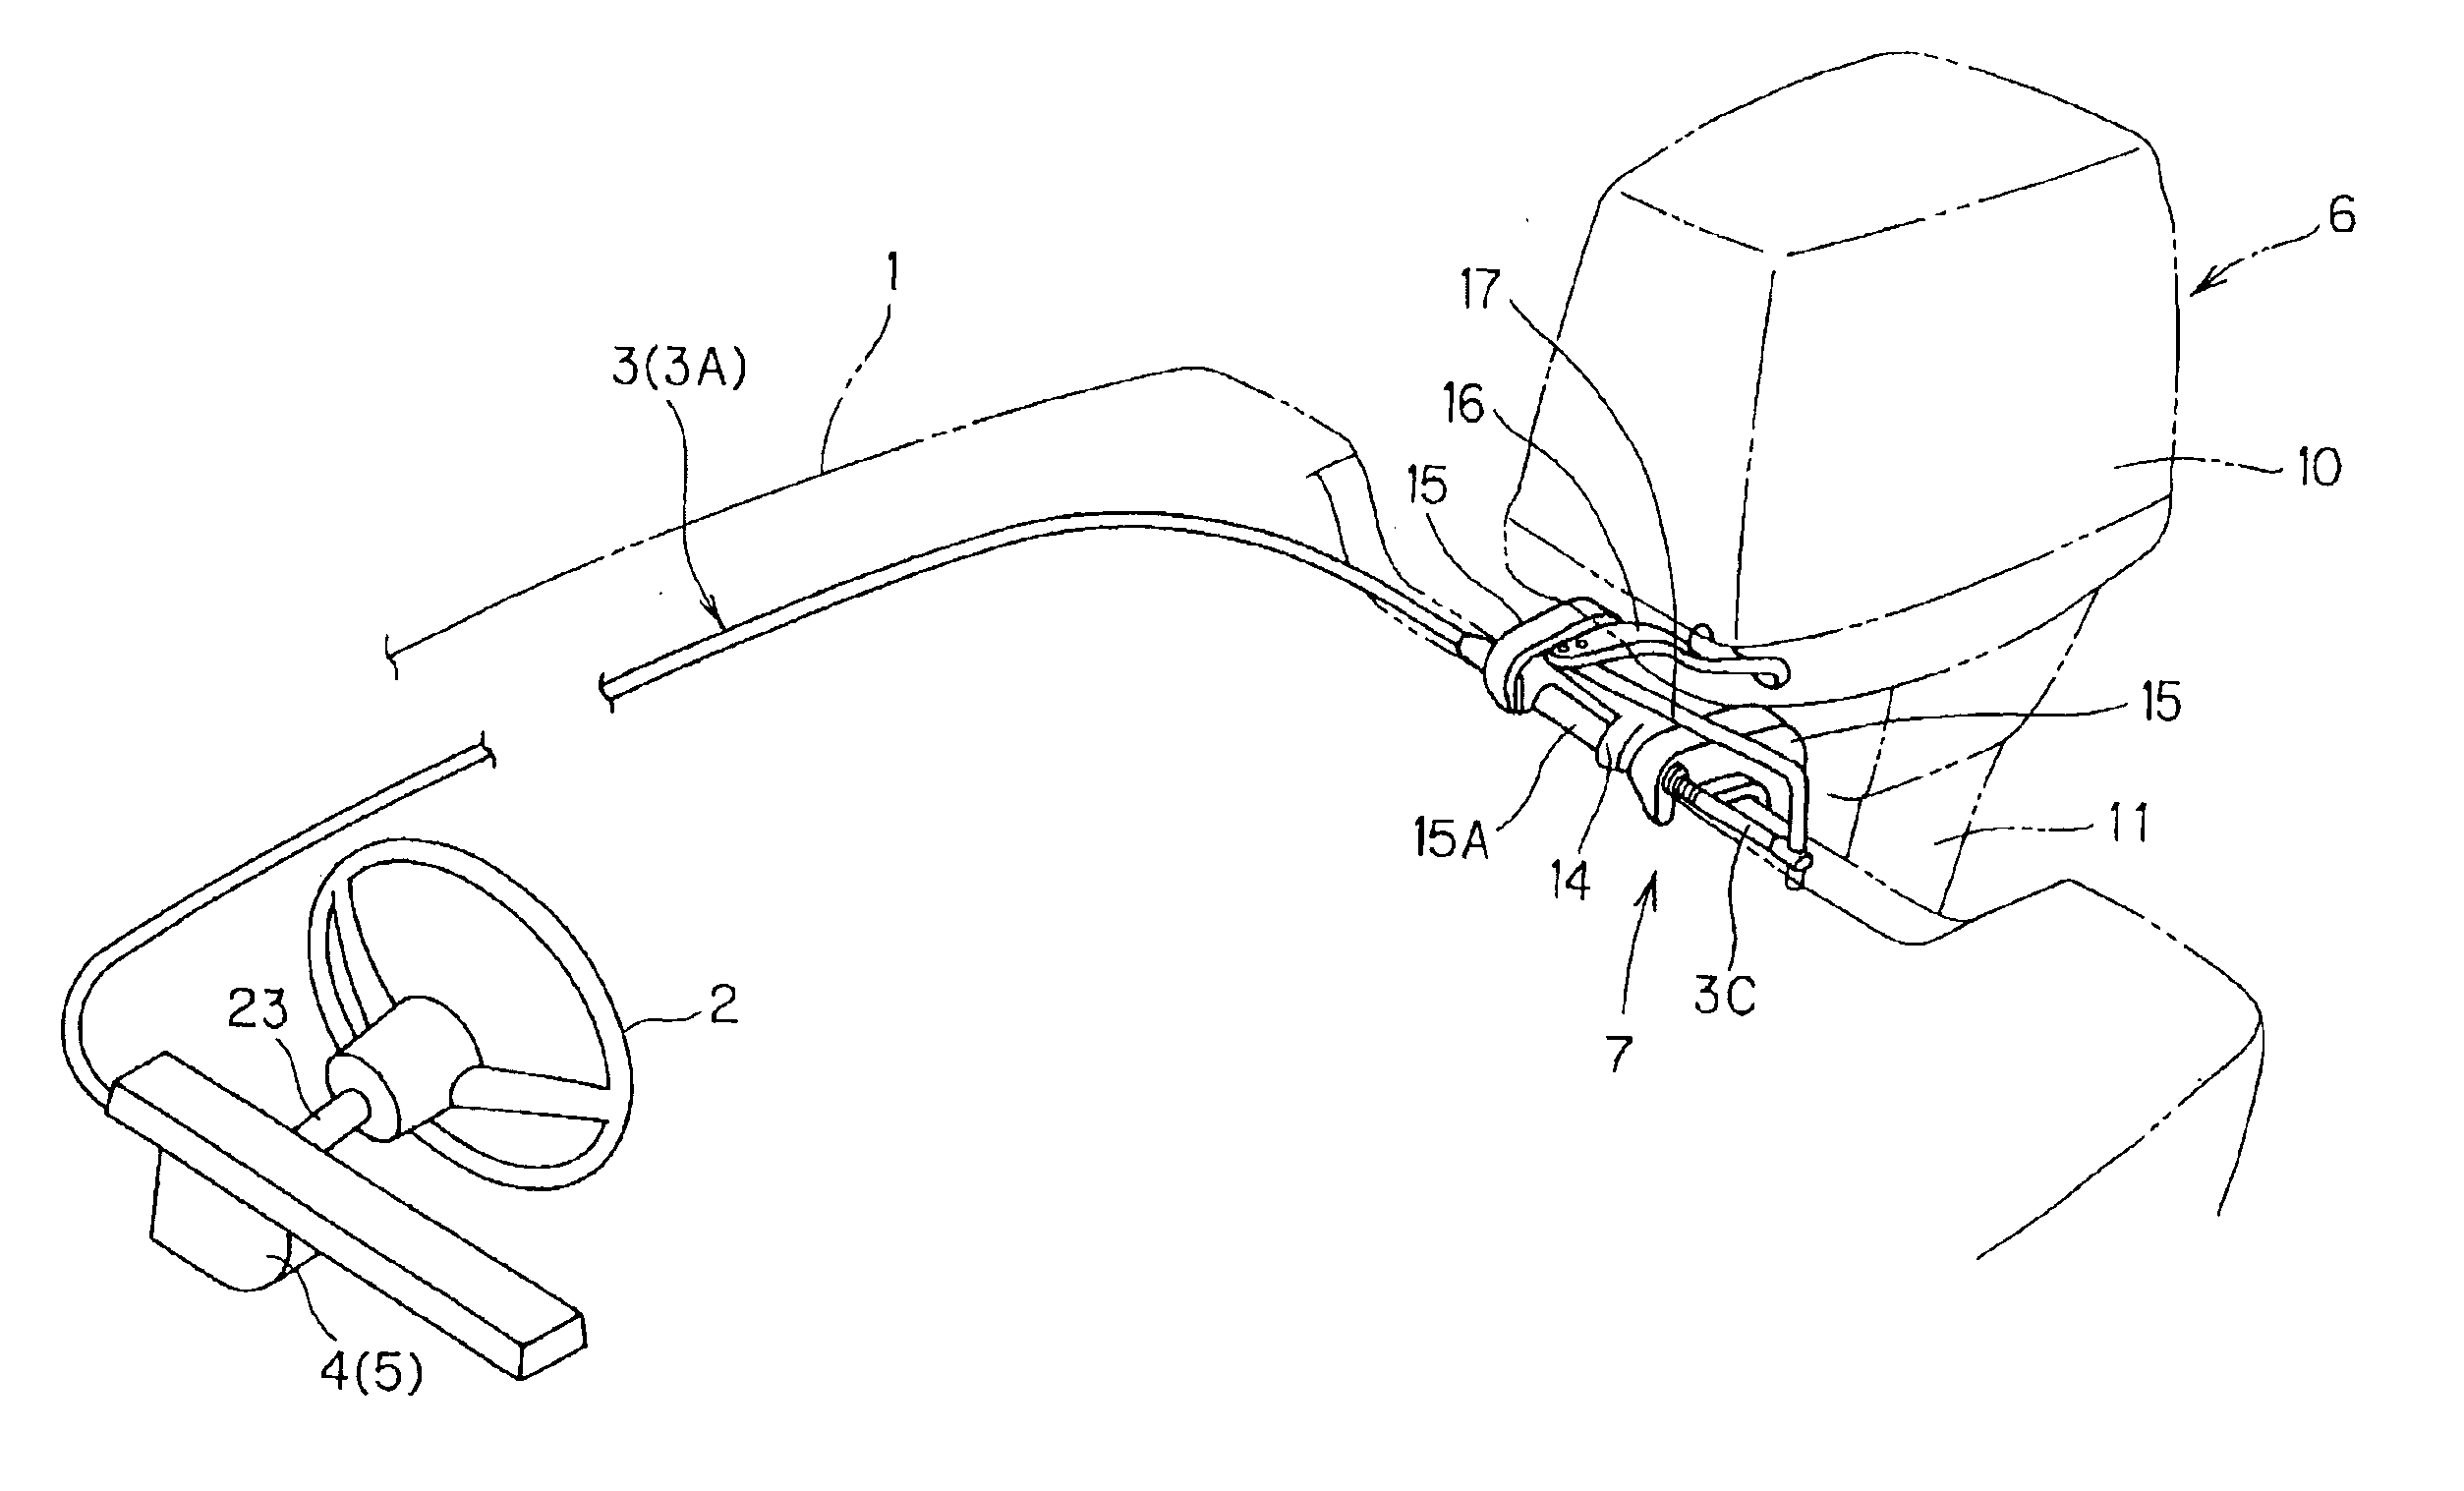 Power steering device for boat with outboard motor